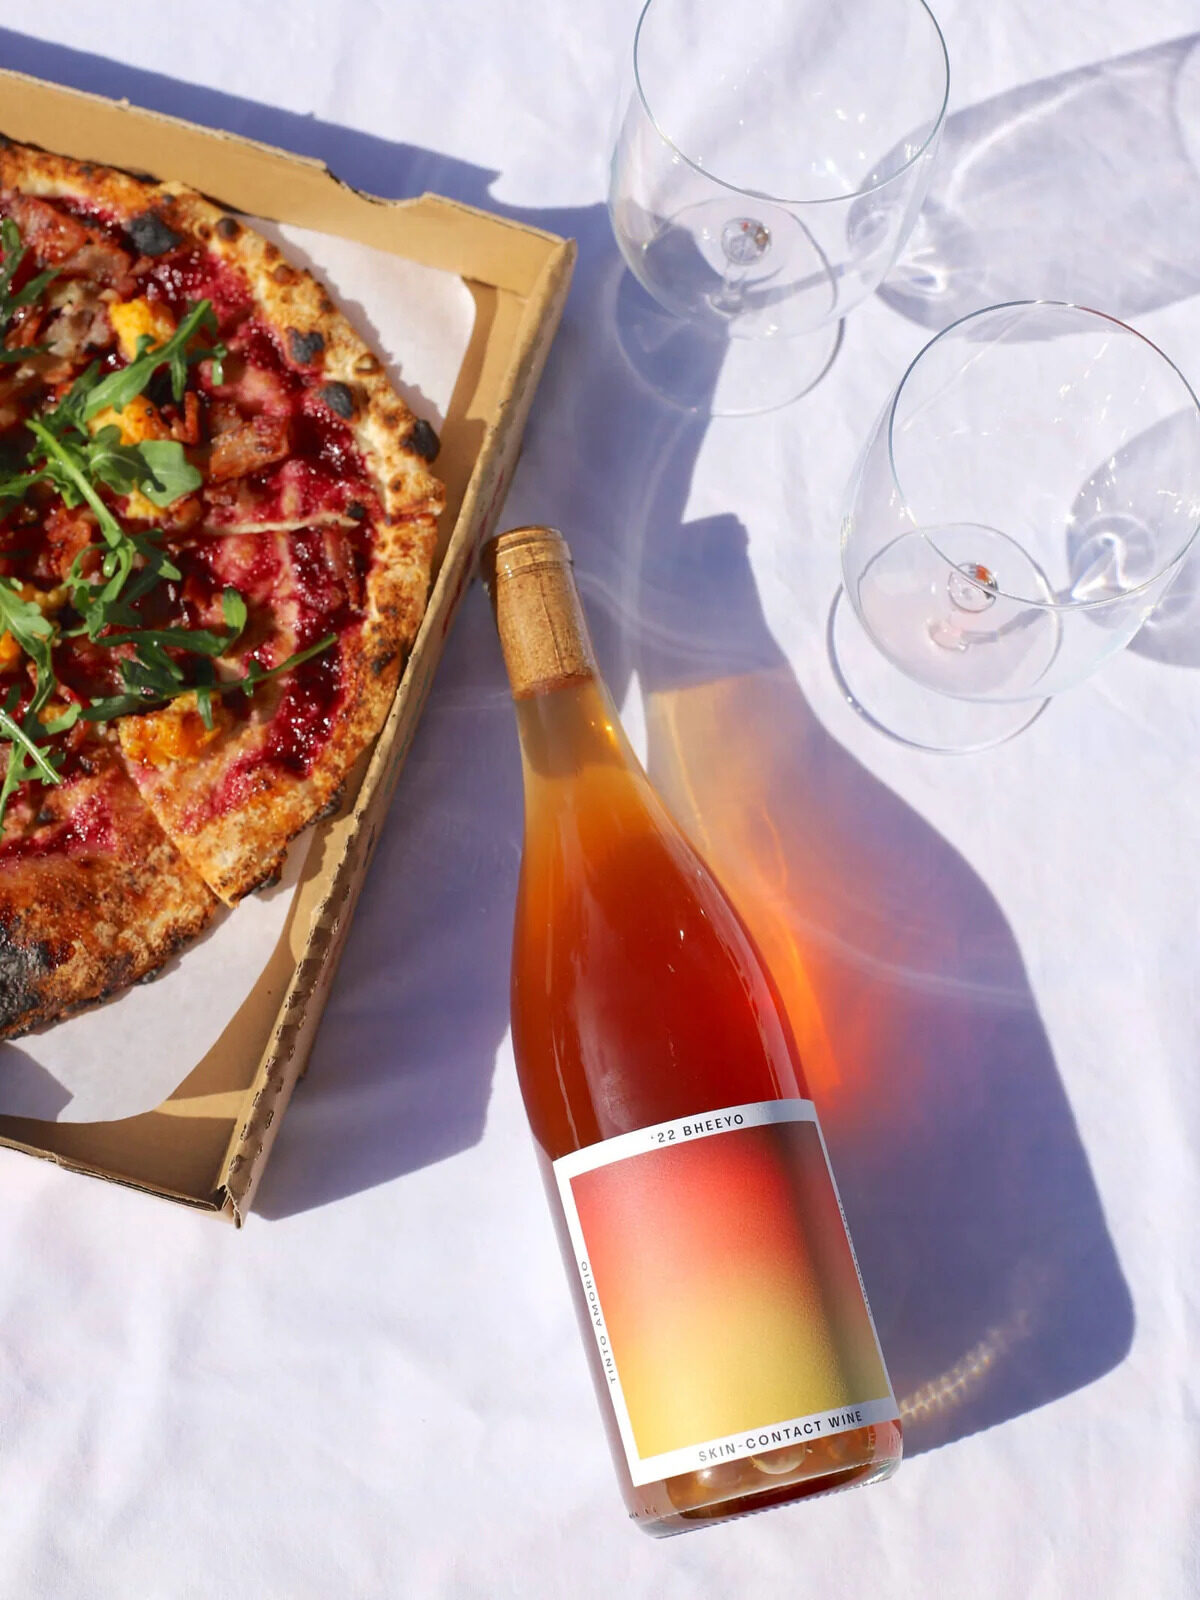 A bottle of Tinto wine on a blanket next to a pizza.